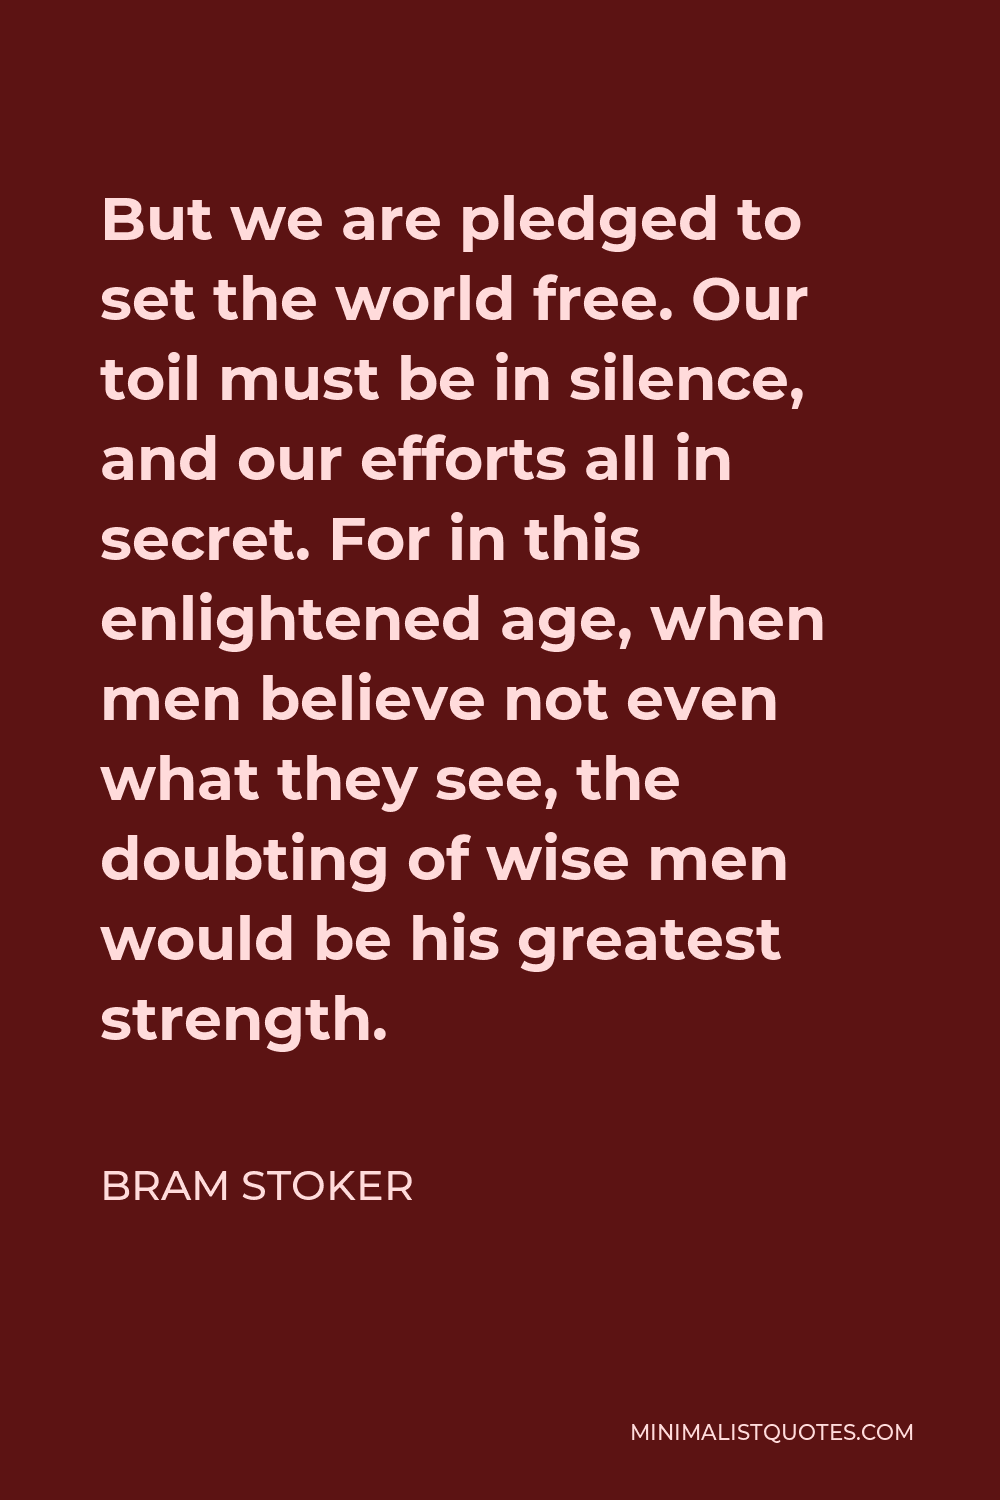 Bram Stoker Quote - But we are pledged to set the world free. Our toil must be in silence, and our efforts all in secret. For in this enlightened age, when men believe not even what they see, the doubting of wise men would be his greatest strength.